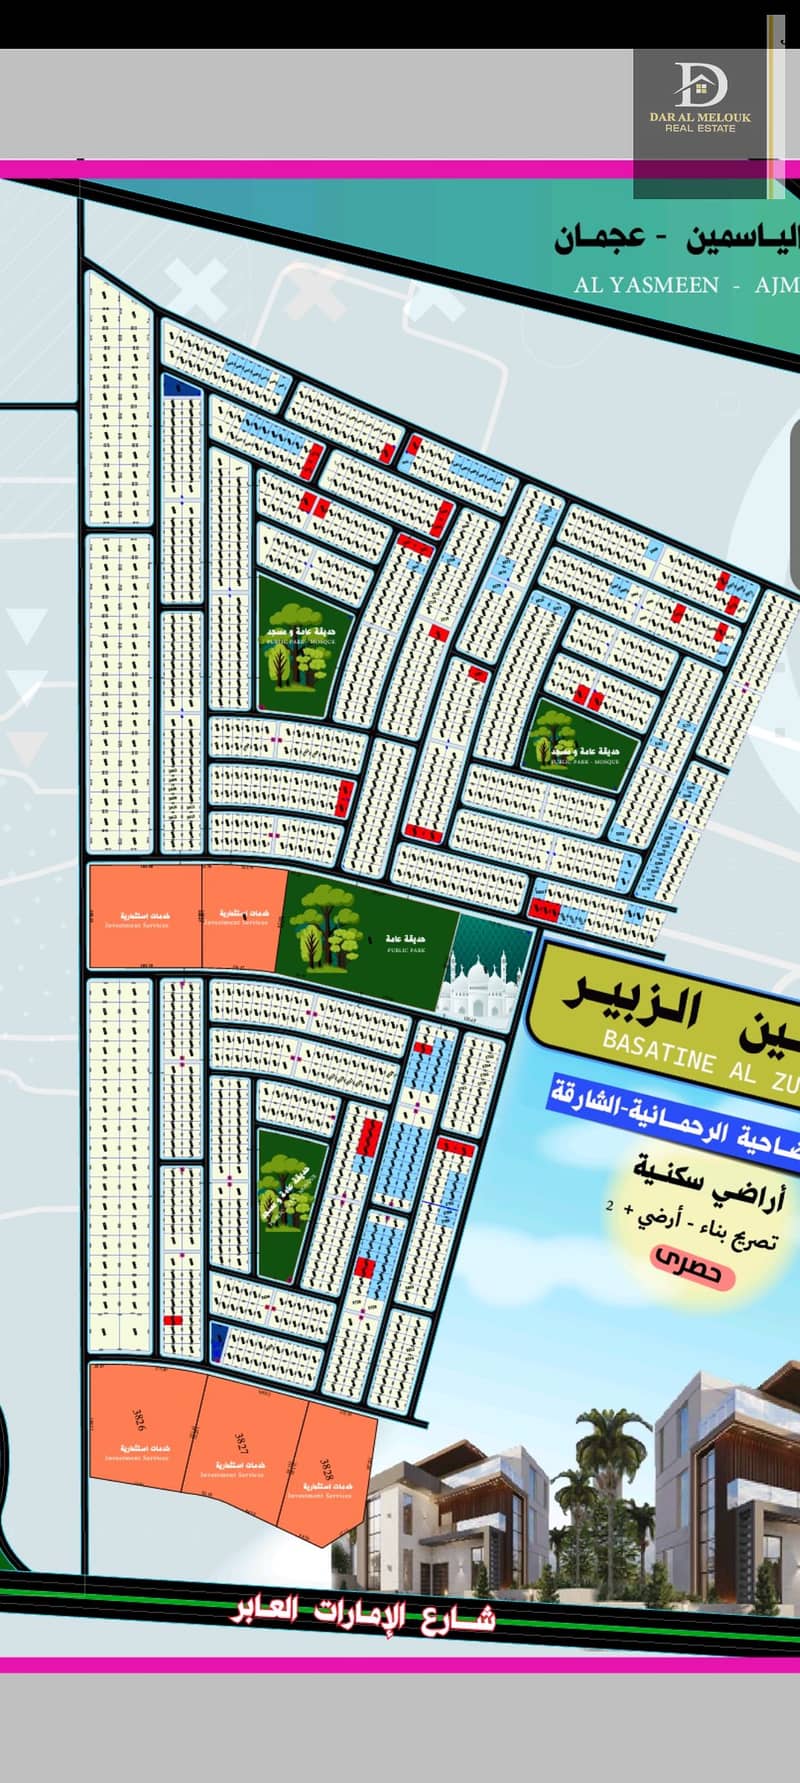 For sale in Sharjah, Basateen Al Zubair area, residential and investment land, area of ​​5000 feet, permit for a ground villa and the first 50% of the surface. Freehold installments have been completed. All Arab nationalities. The Basateen Al Zubair area